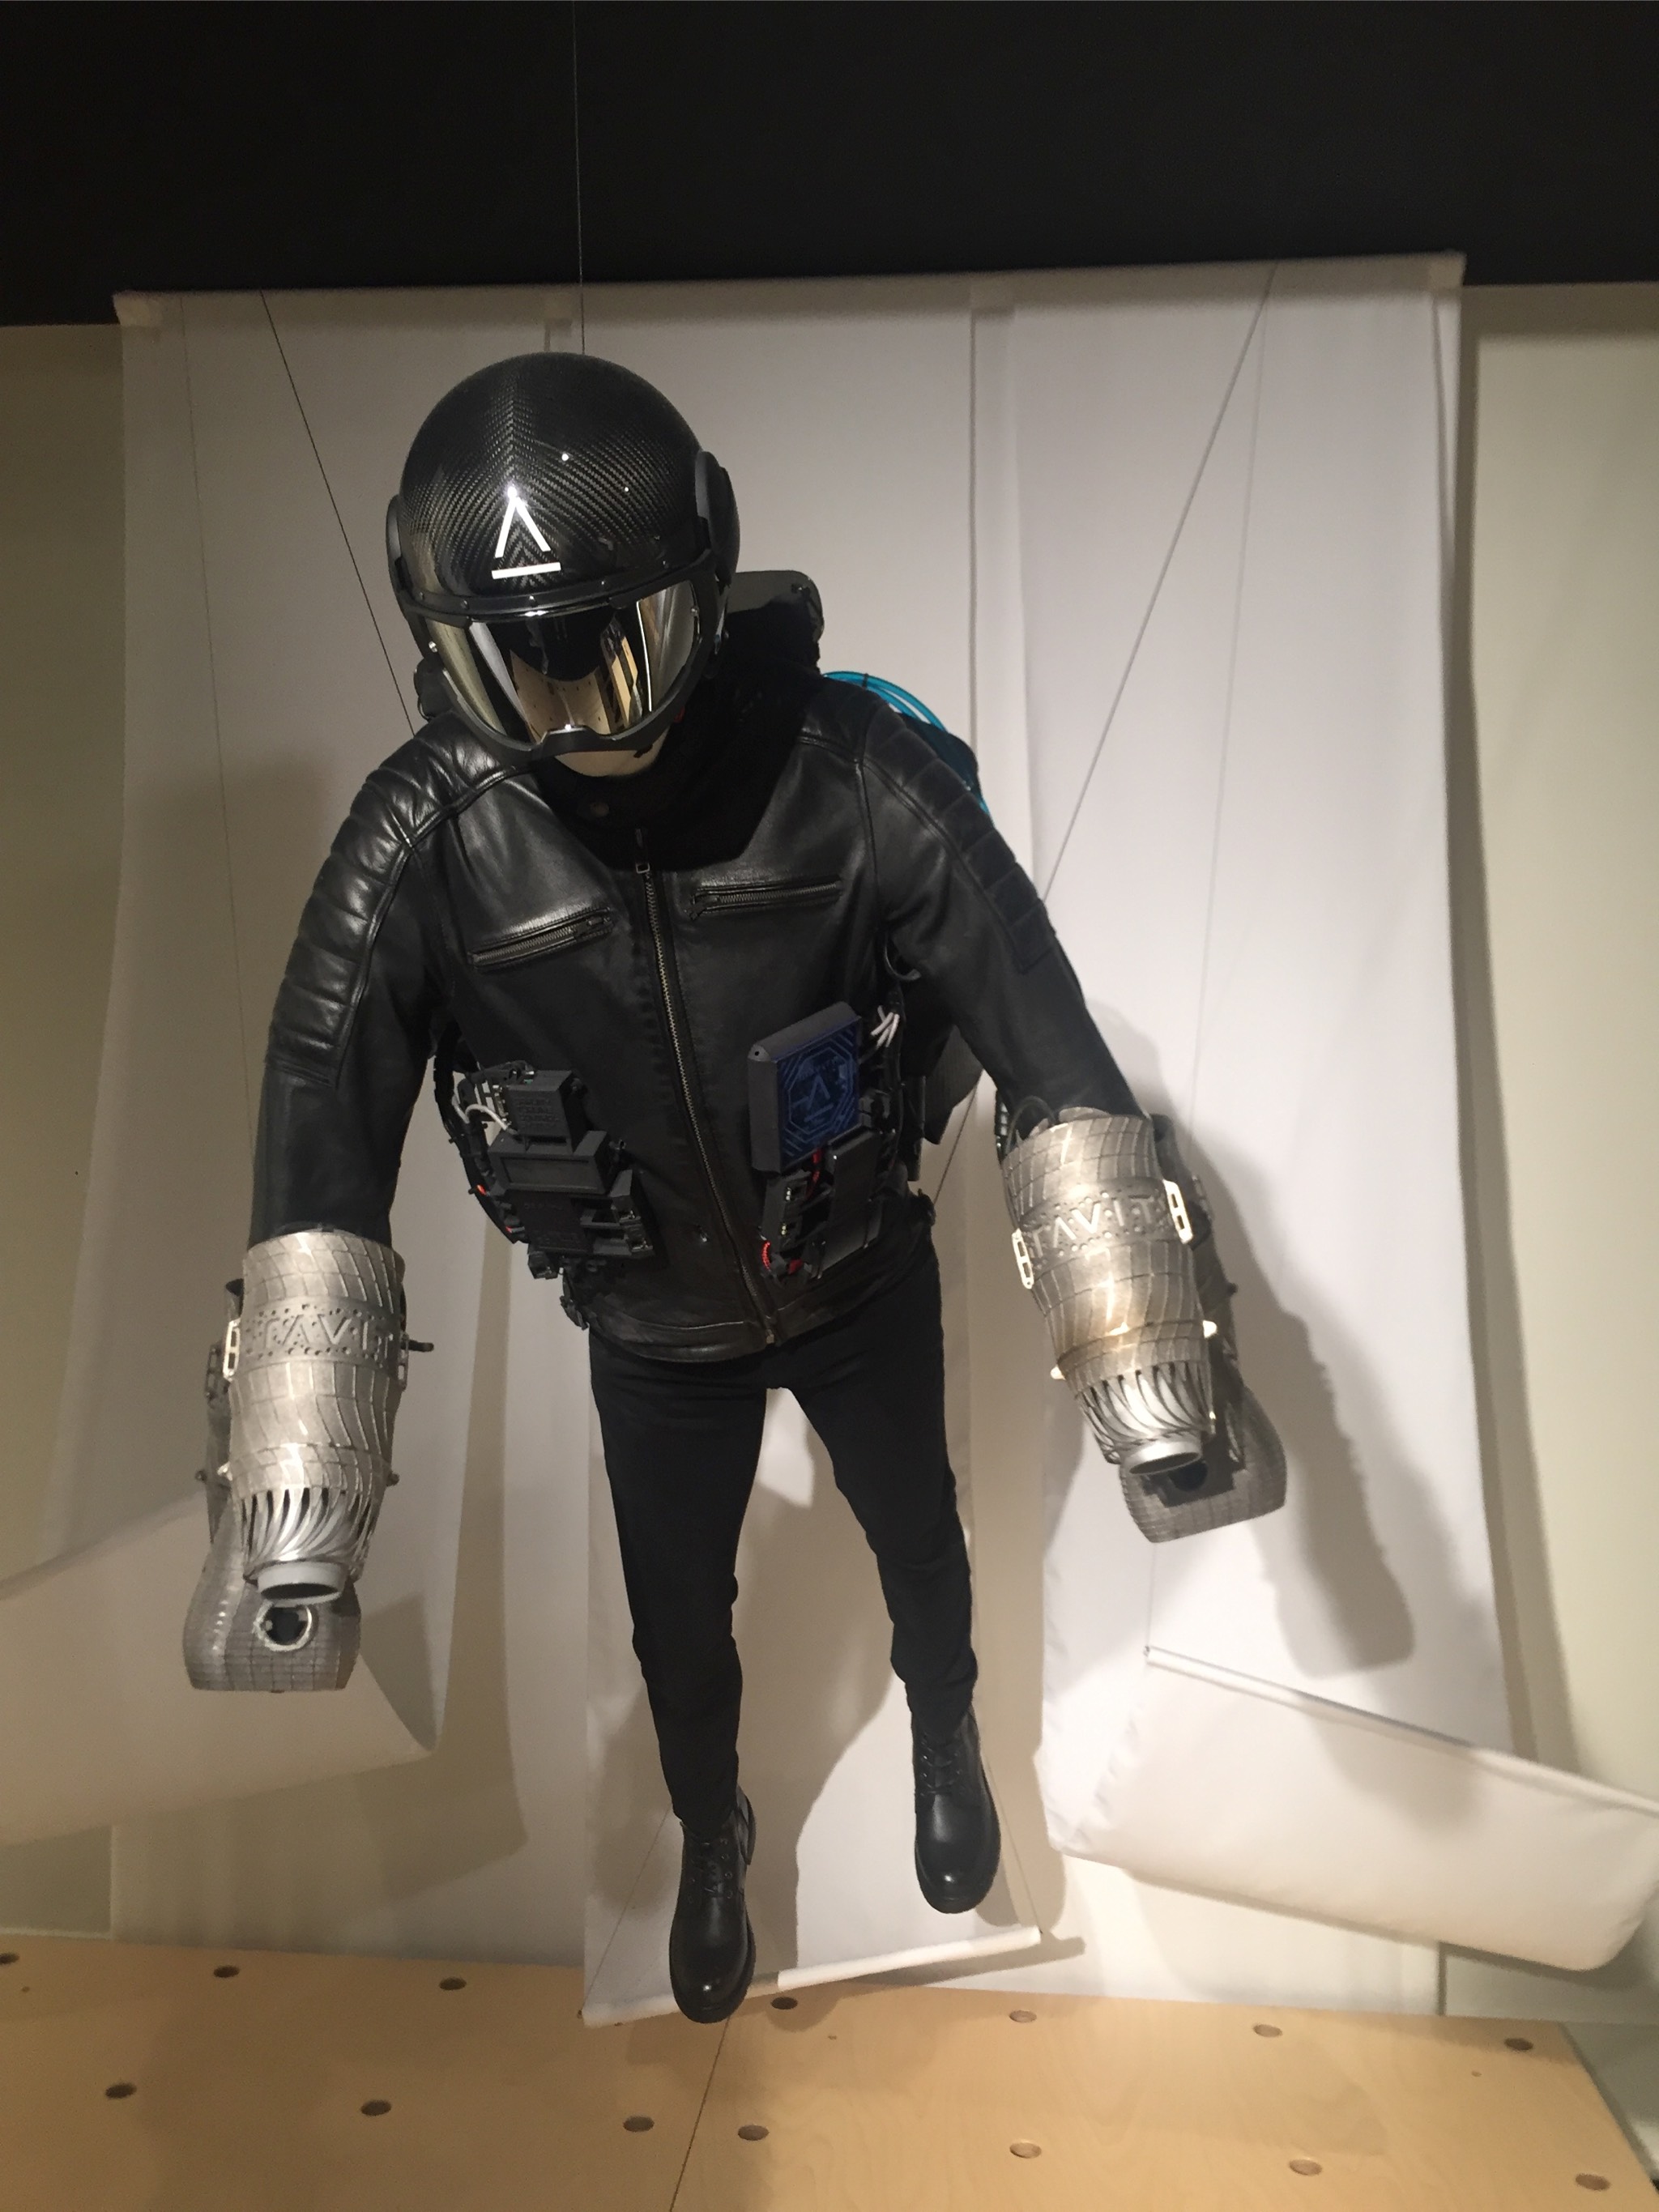  Created by Richard Browning, chief test pilot and founder, this Jet Suit can travel more than 30 miles per hour and ascend to 12,000 feet. 